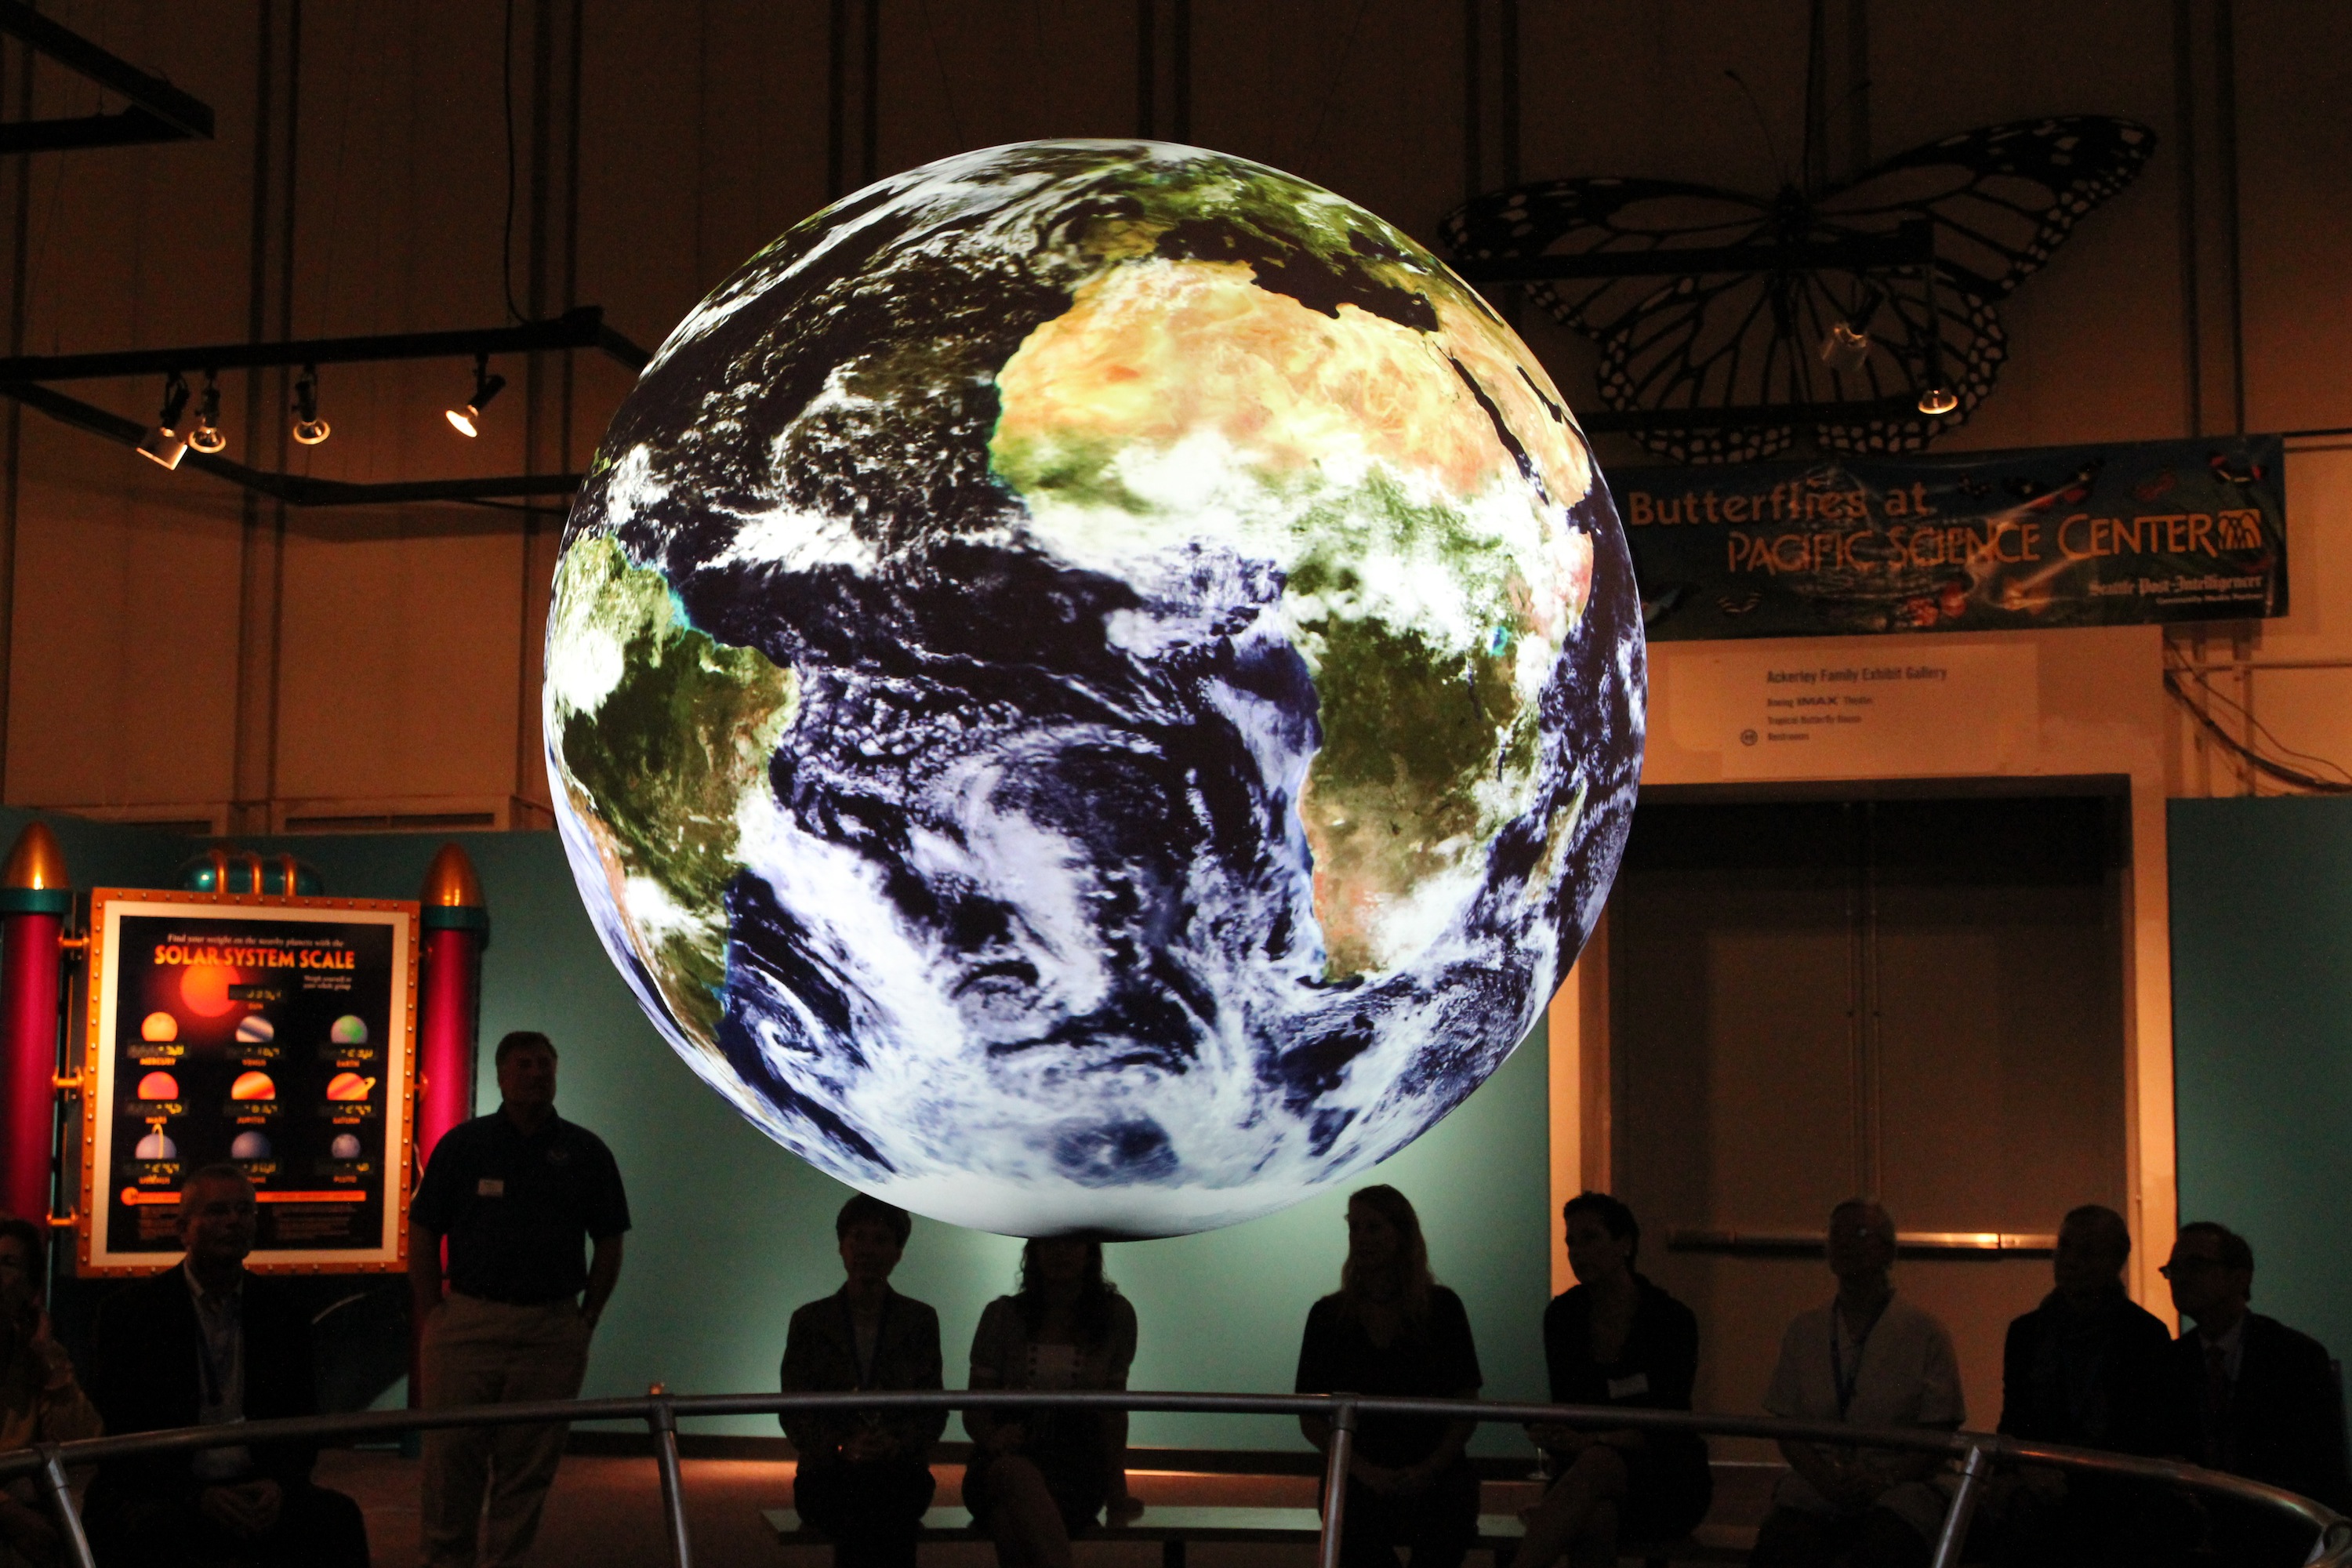 Science On a Sphere displays satellite imagery of Earth, behind the Sphere can be seen silhouettes of people sitting on benches watching the Sphere